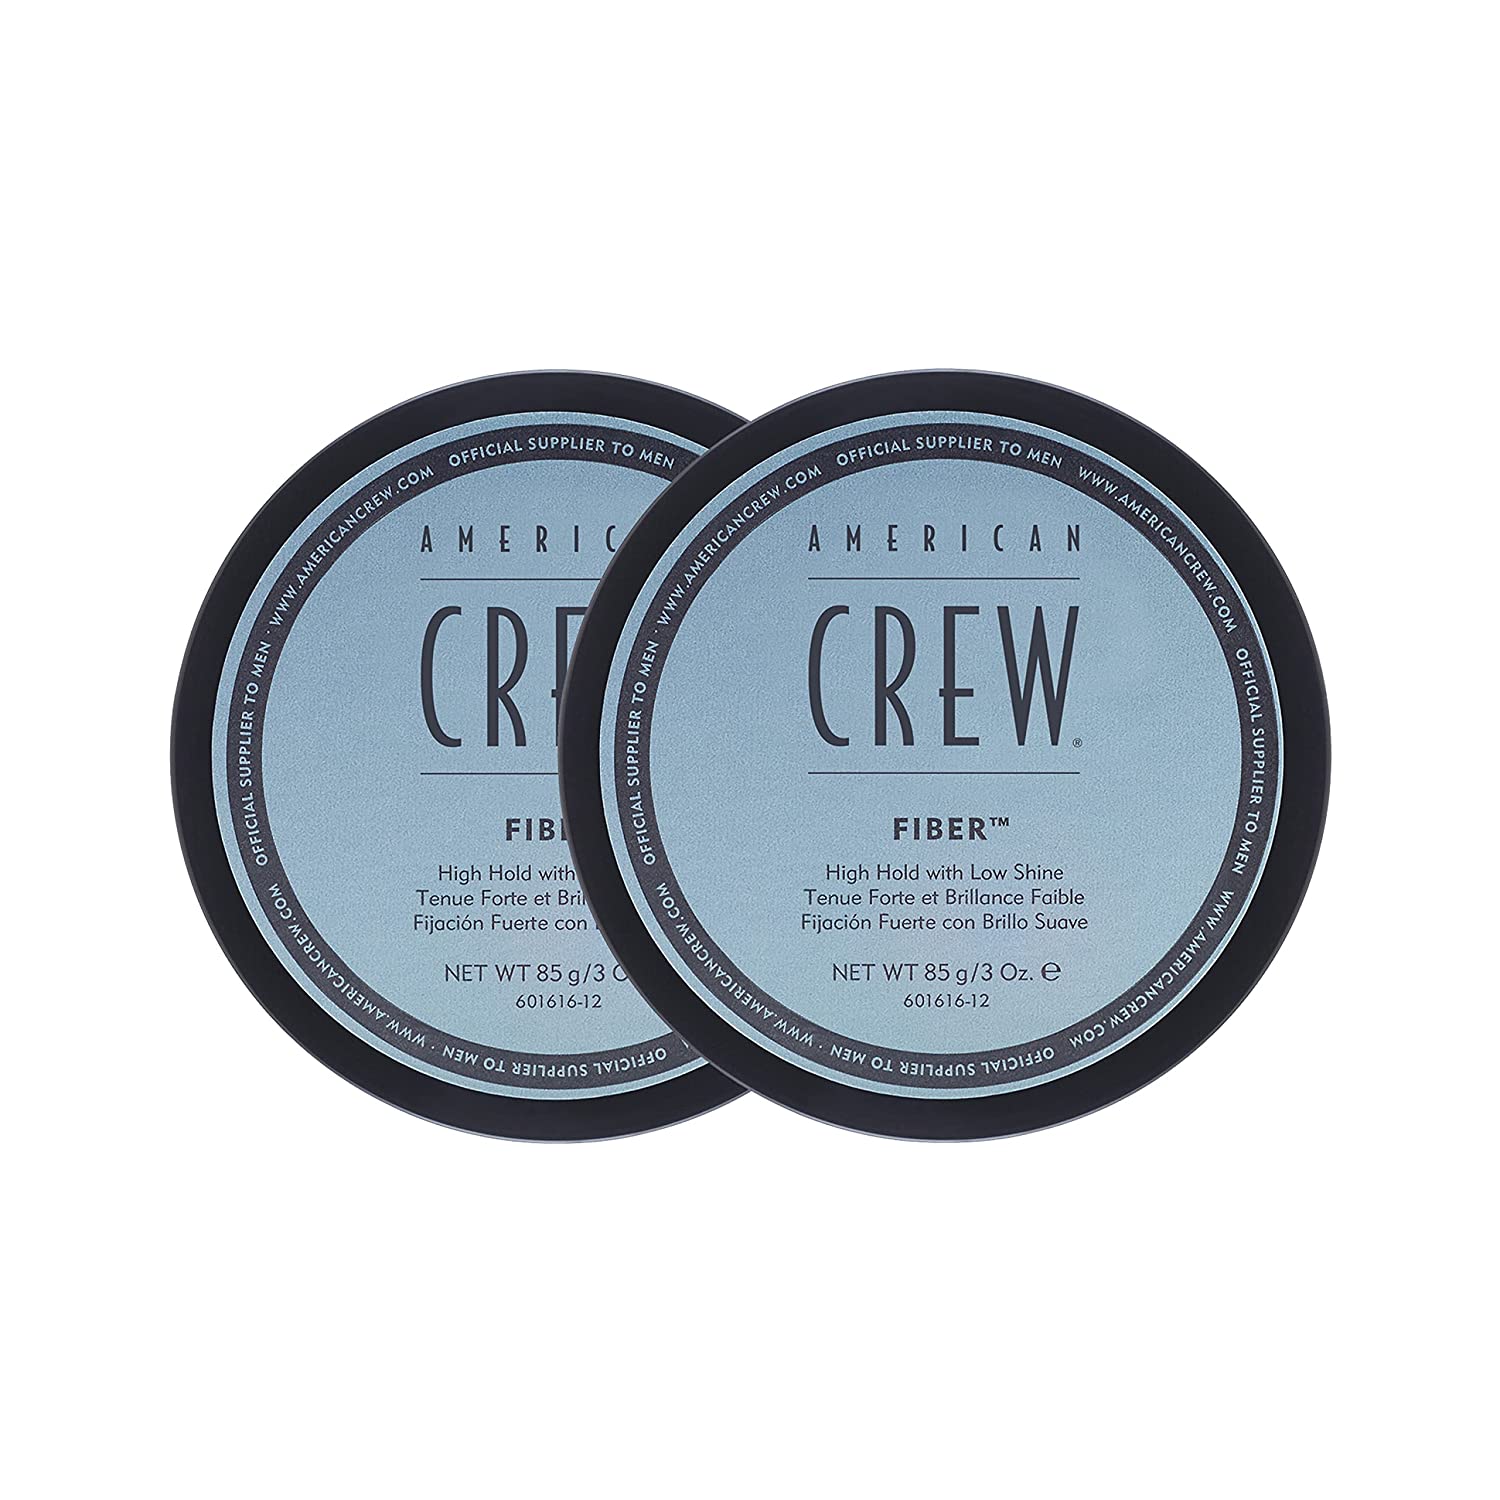 ''Men's HAIR Fiber by American Crew, Like HAIR Gel with High Hold with Low Shine, 3 Oz (Pack of 2)''